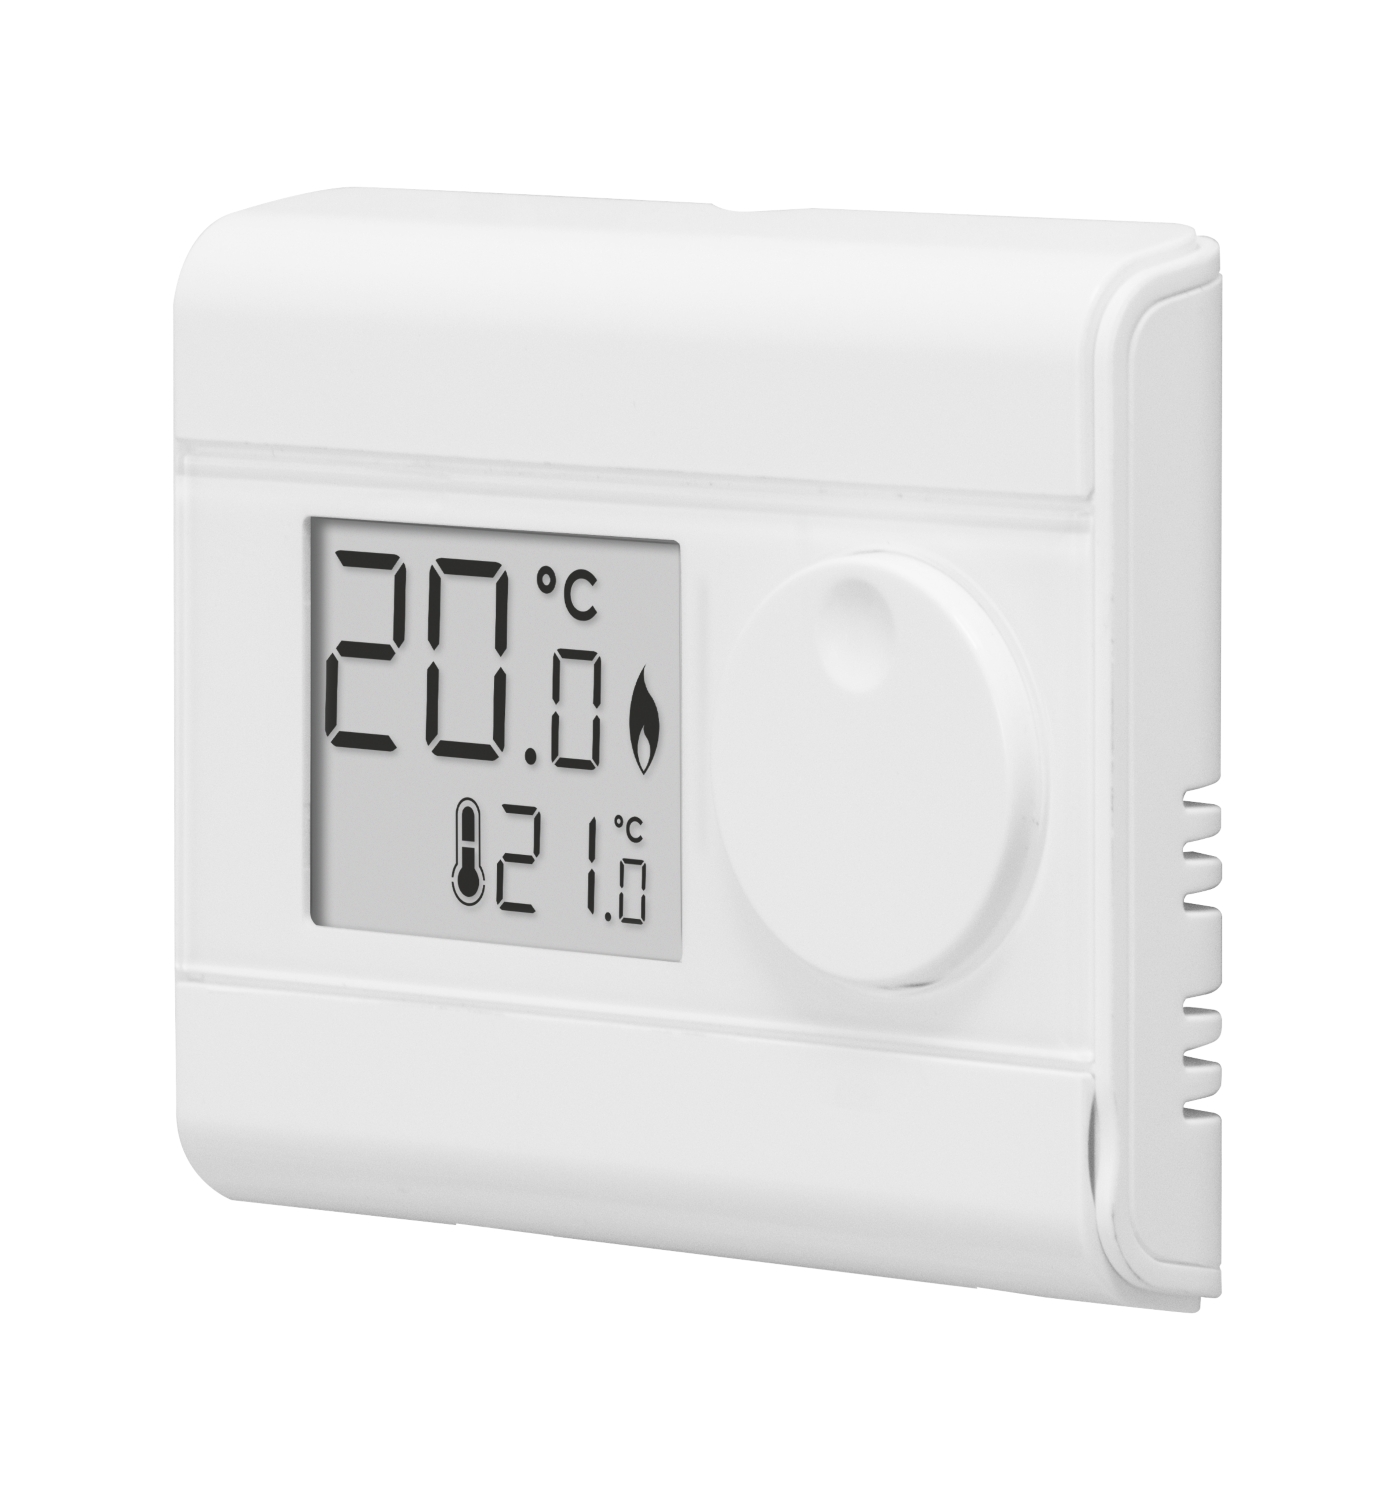  Thermostat d'ambiance digital non programmable 